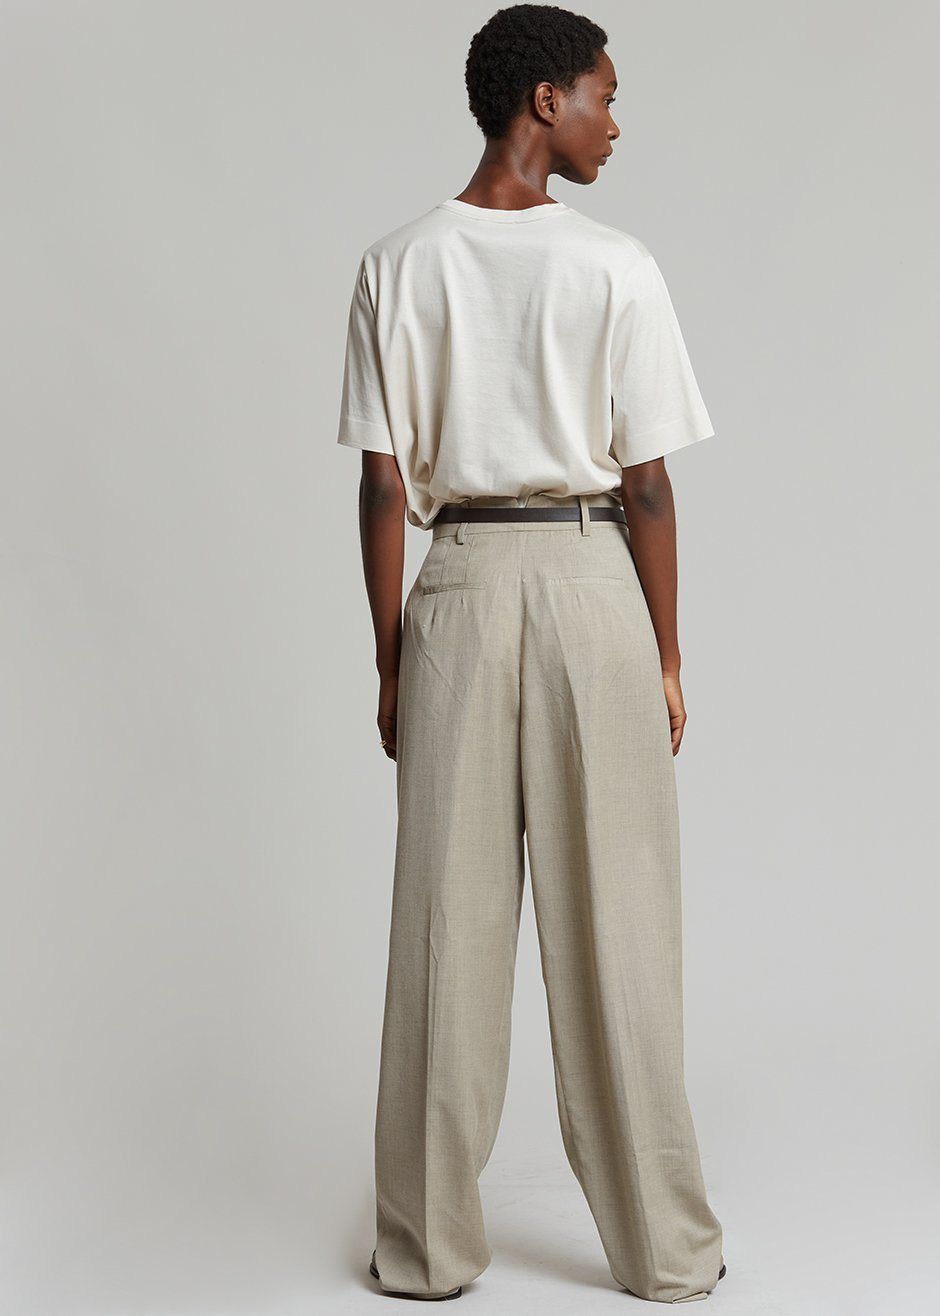 Gelso Pleated Trousers - Light Taupe Melange - 15